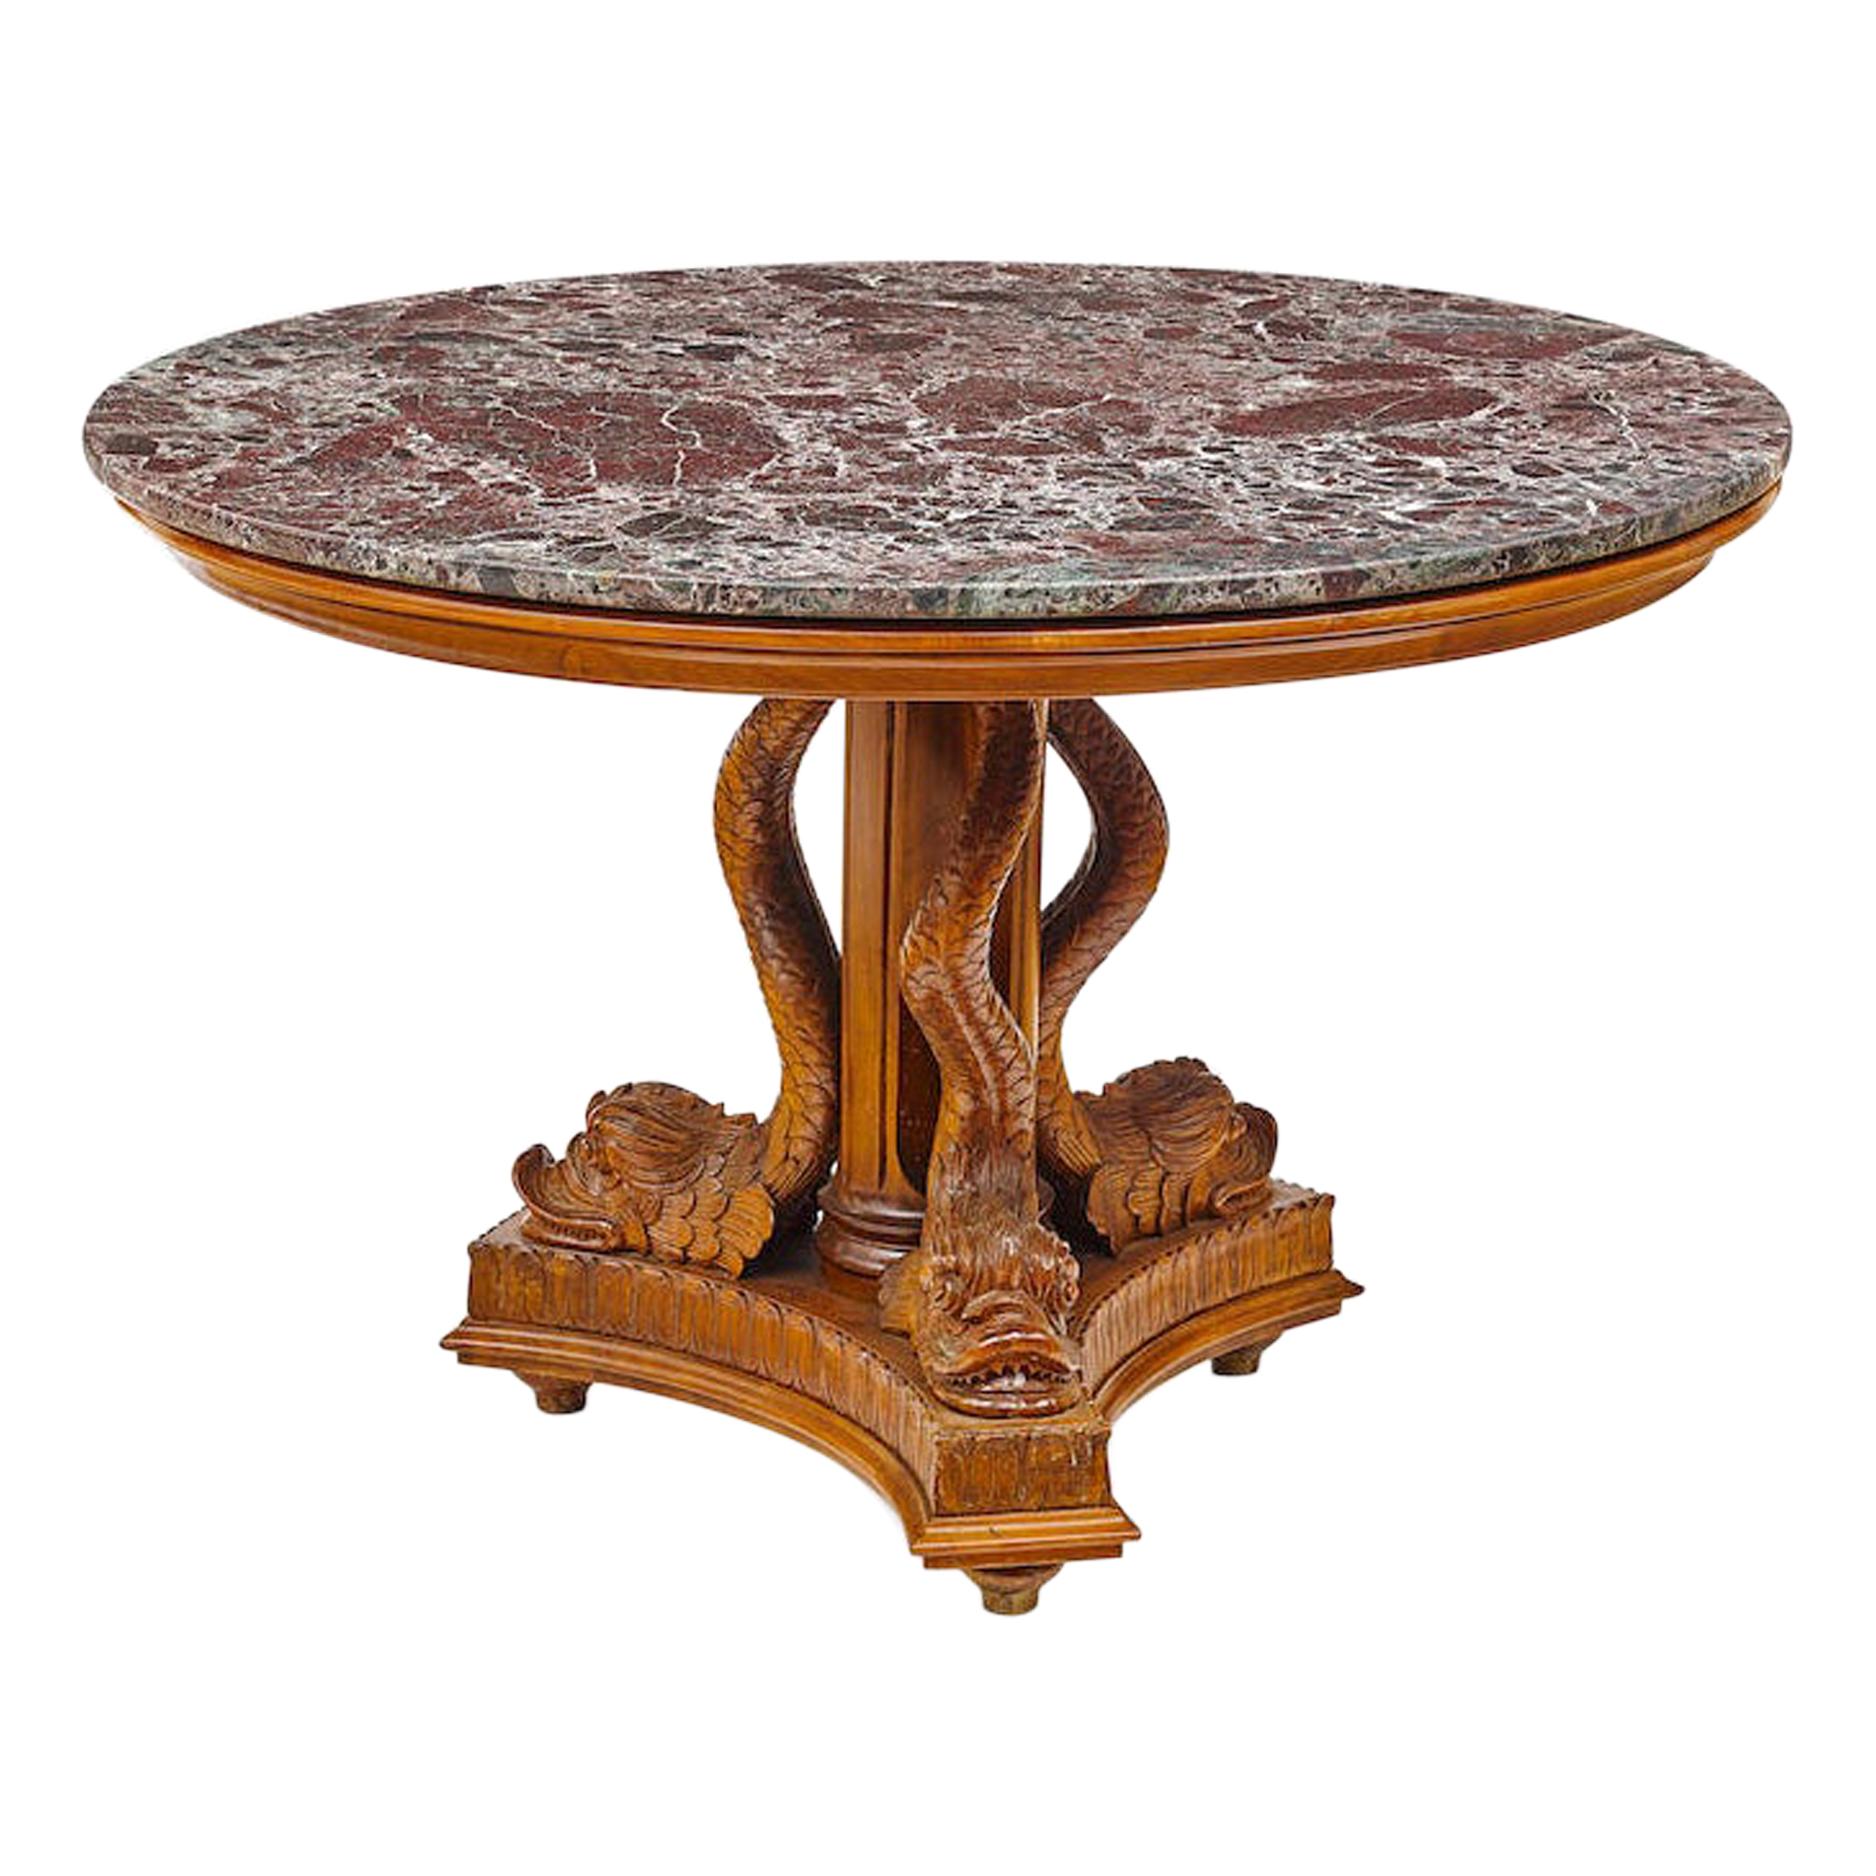 Round Pedestal Table with Dolphins, Early 20th Century